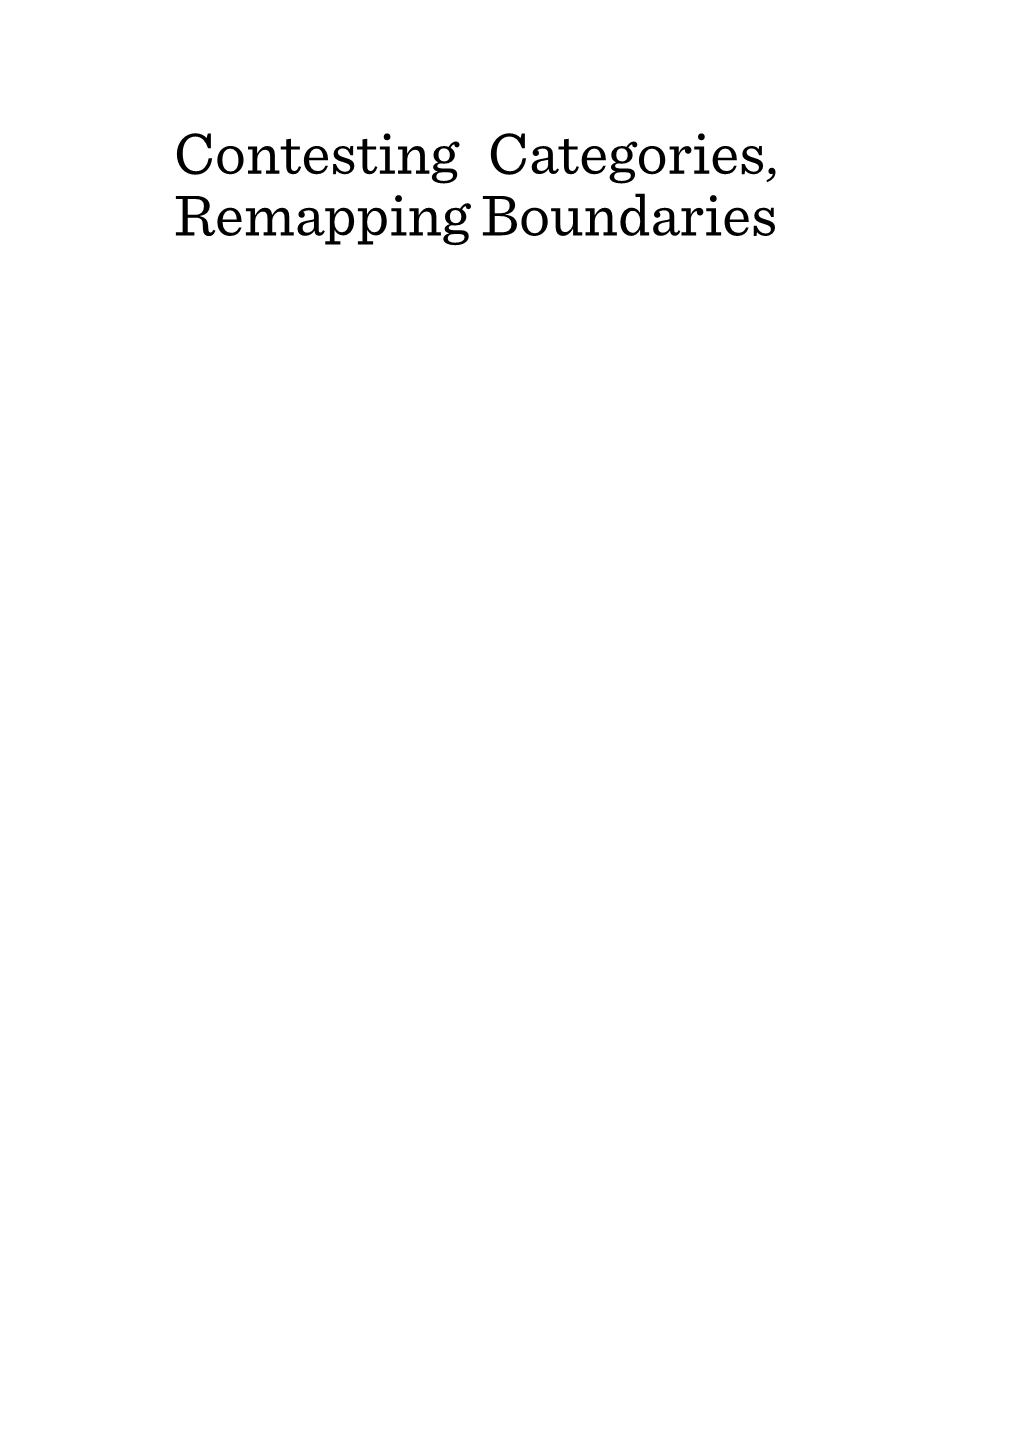 Contesting Categories, Remapping Boundaries